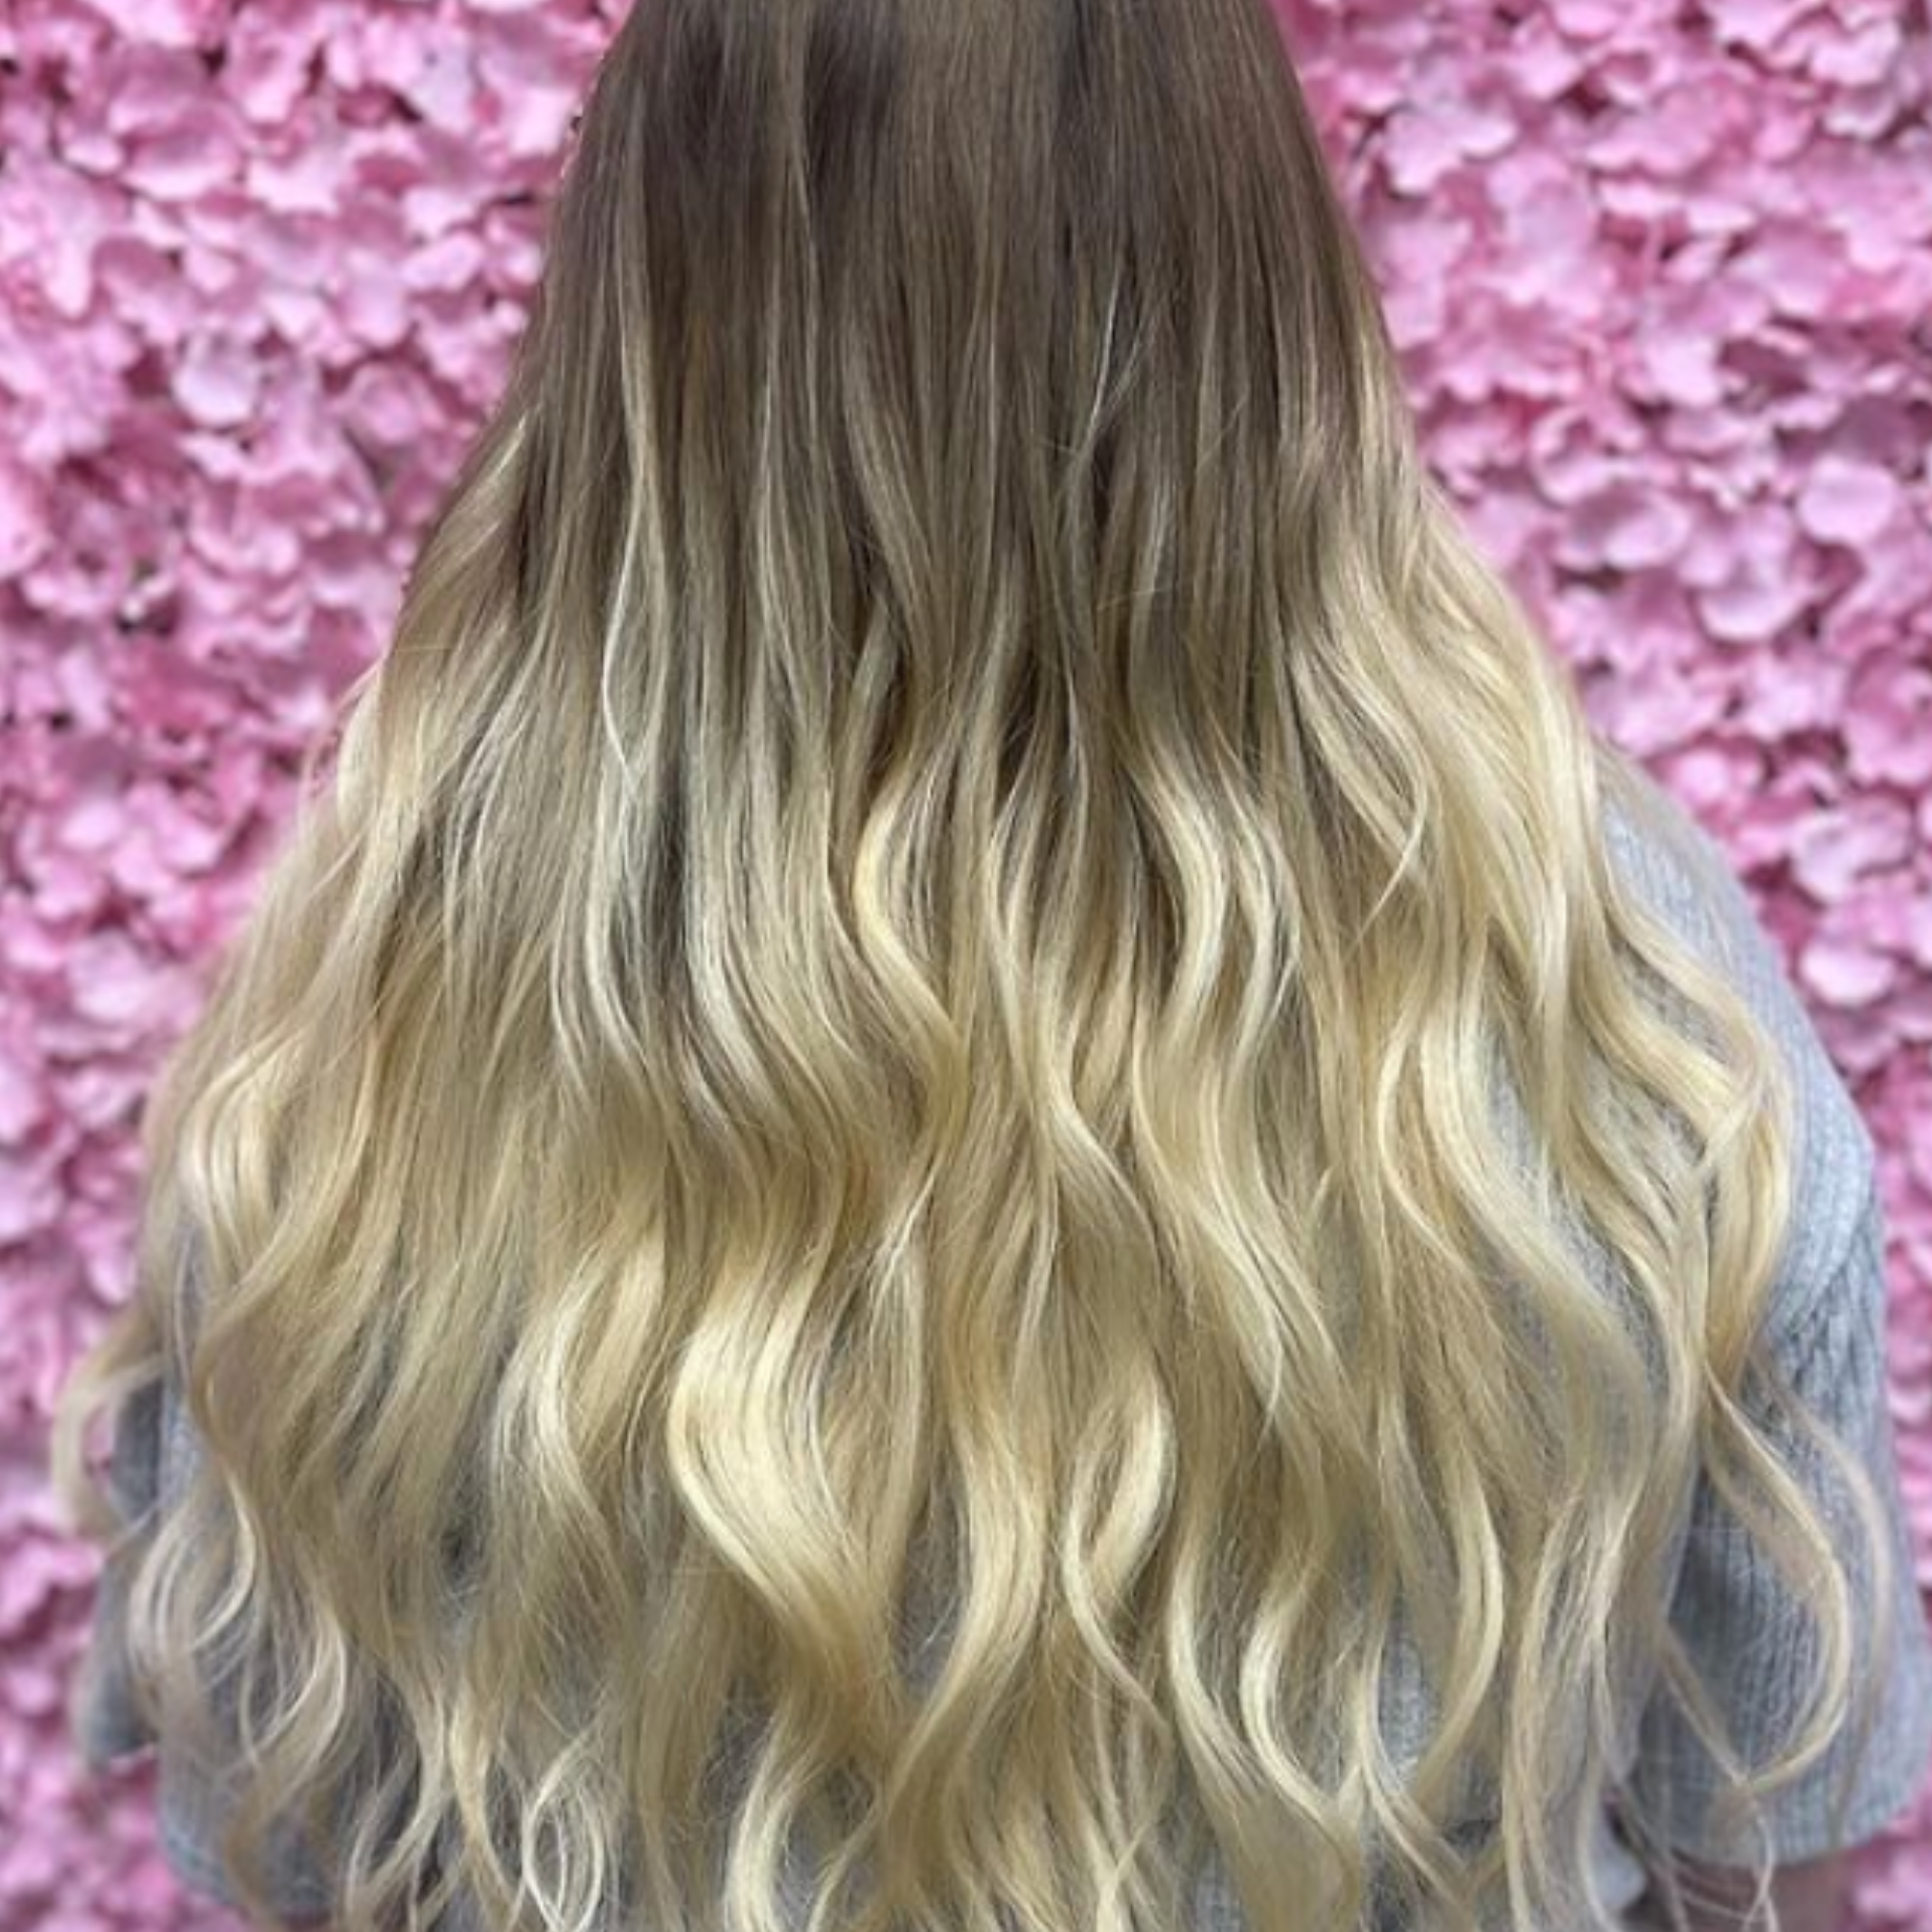 "hair rehab london 18" weft hair extensions shade swatch titled rooted bali blonde"